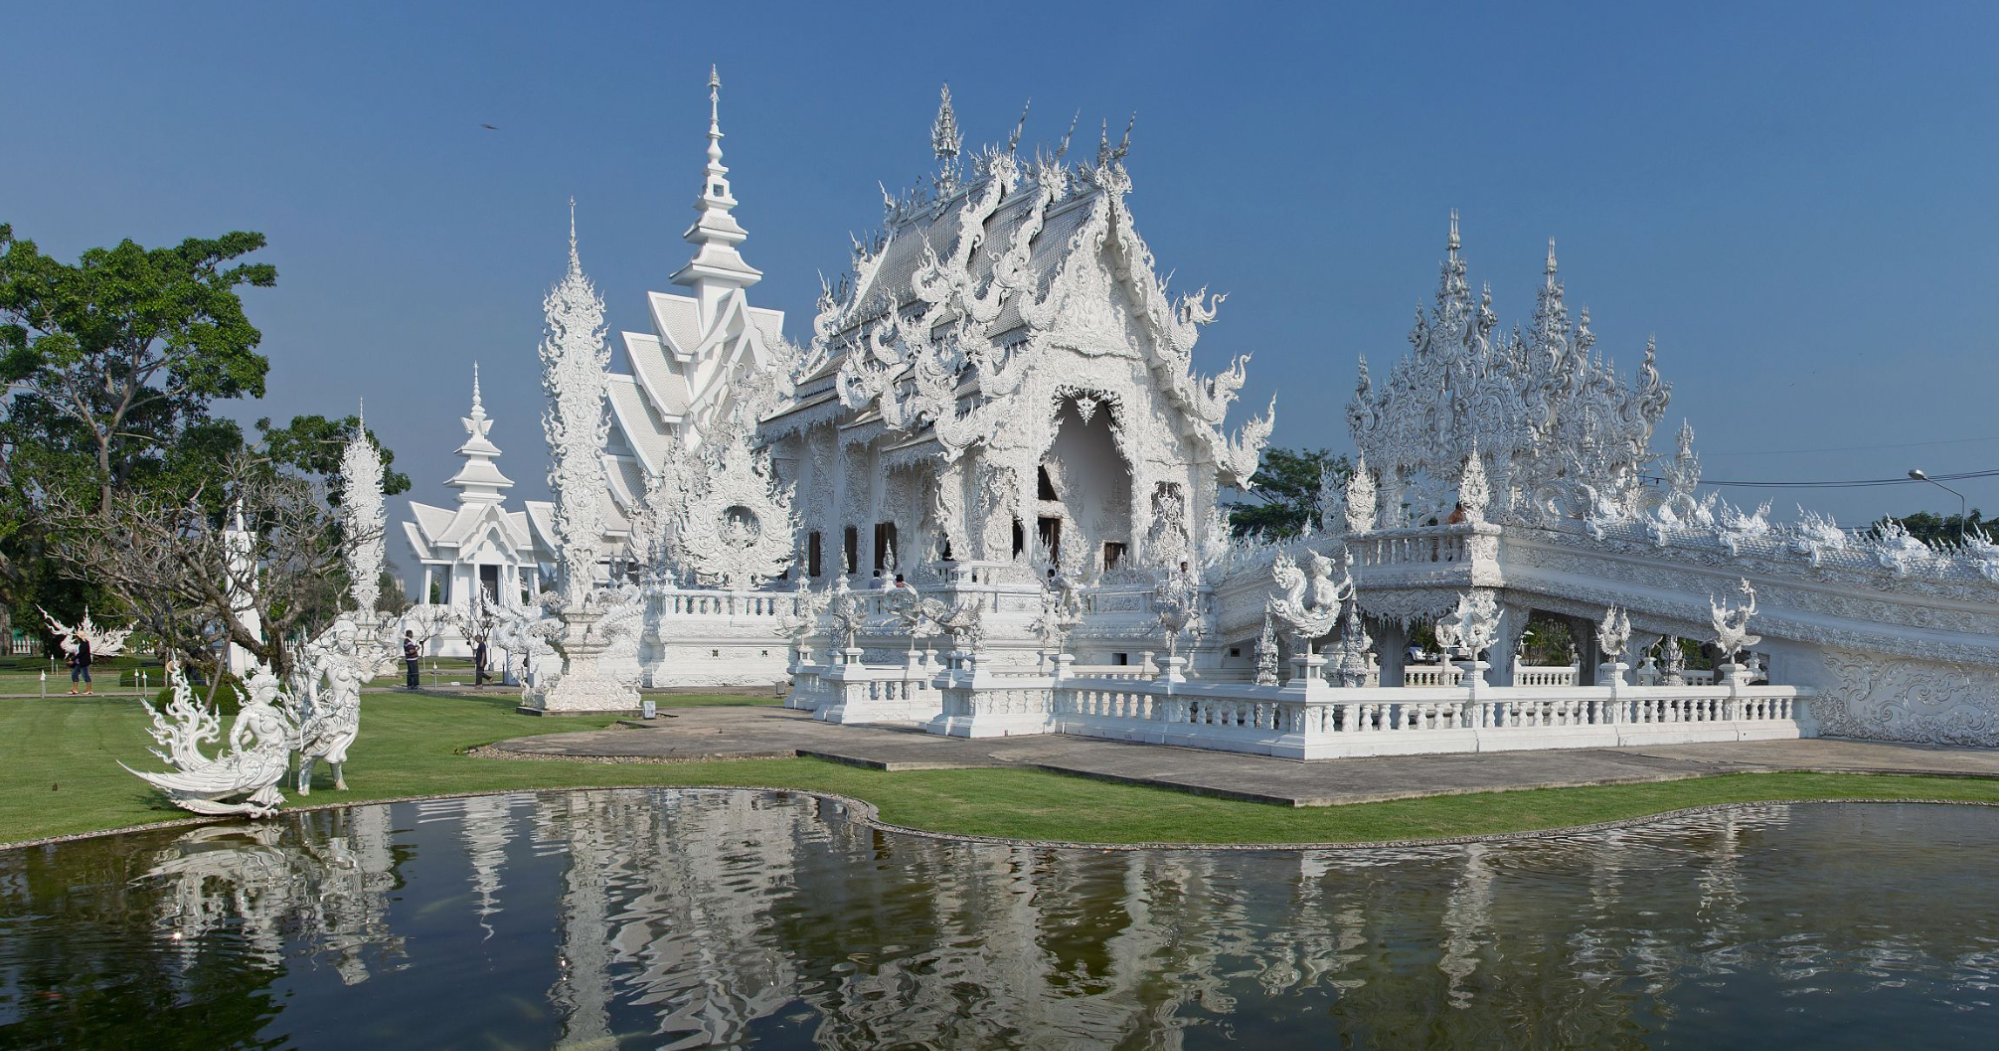 Admire the intricate details of the White Temple in Chiang Rai, a must-see attraction in Thailand.